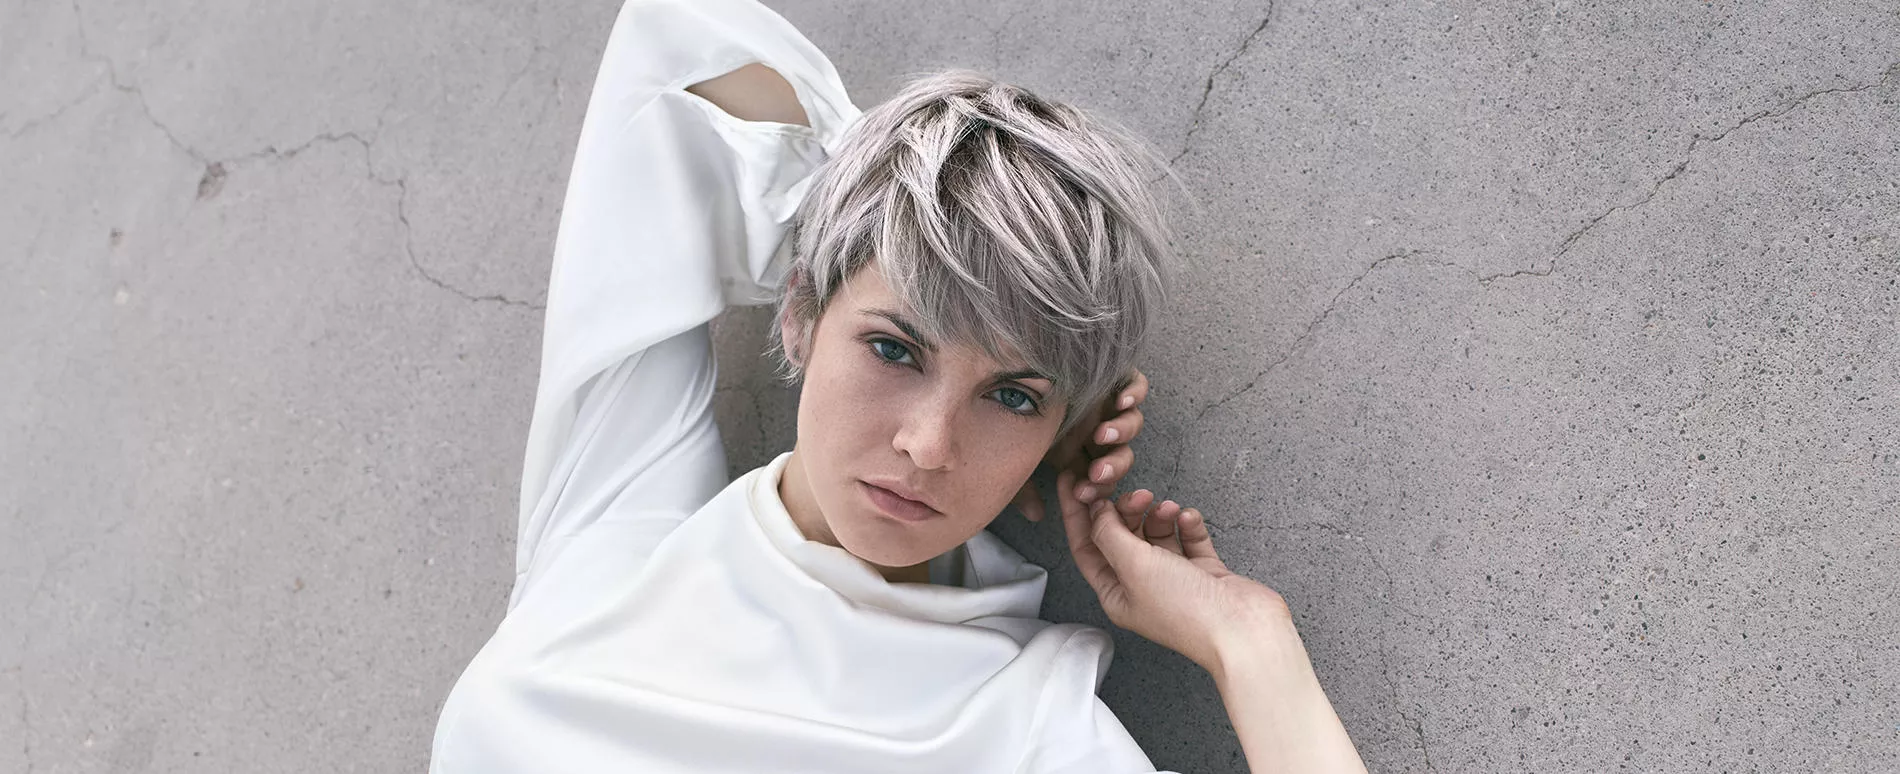 A woman with a soft gray pixie haircut lies on slate-colored ground